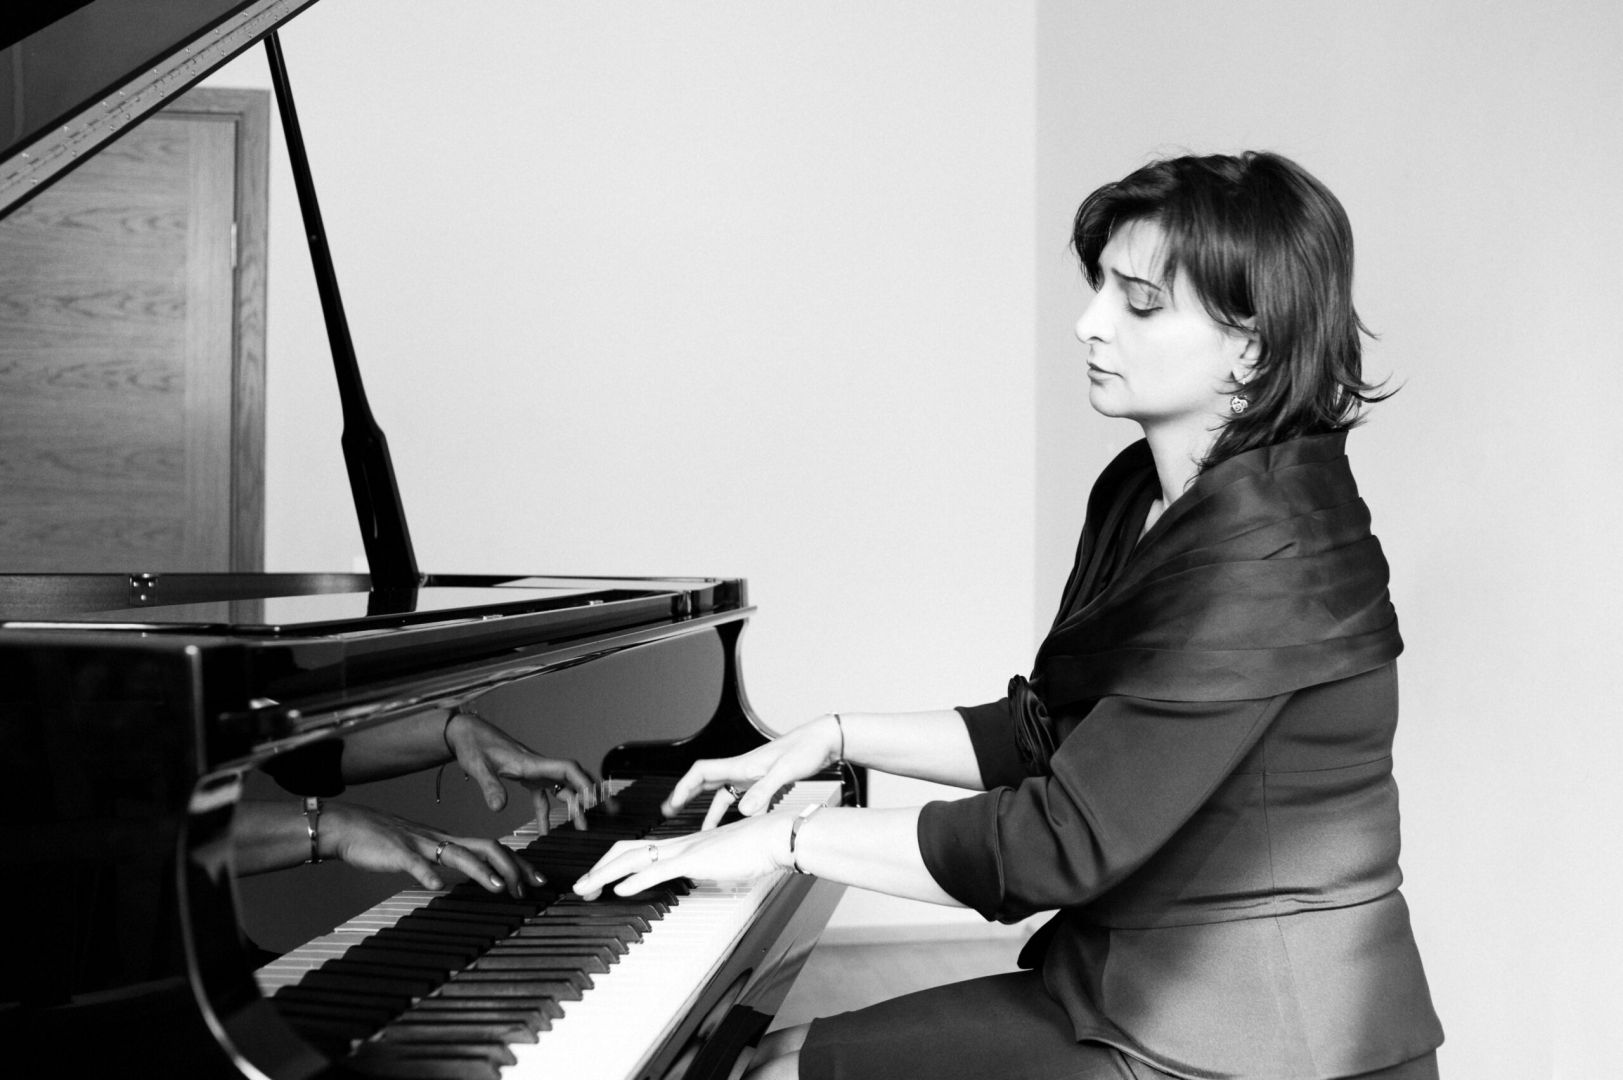 Azerbaijani pianist gives concert at famous Carnegie Hall cultural center in New York